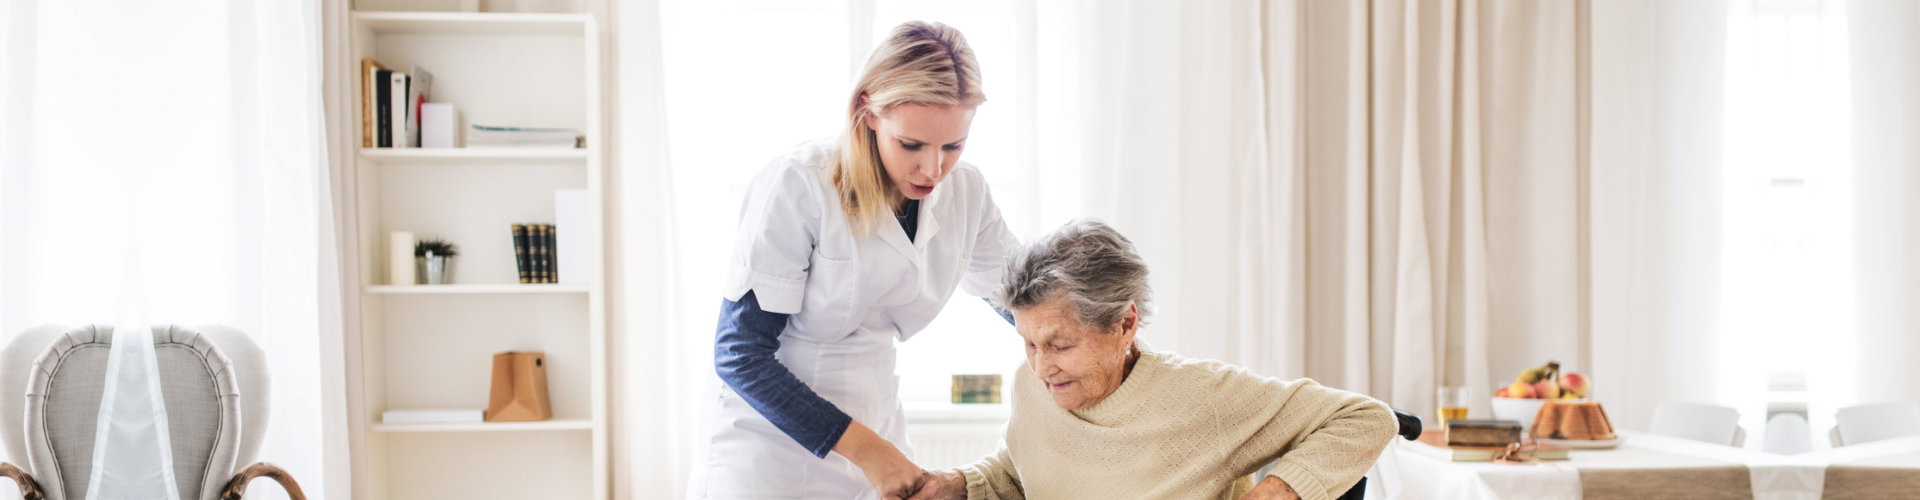 caregiver assisting the old woman